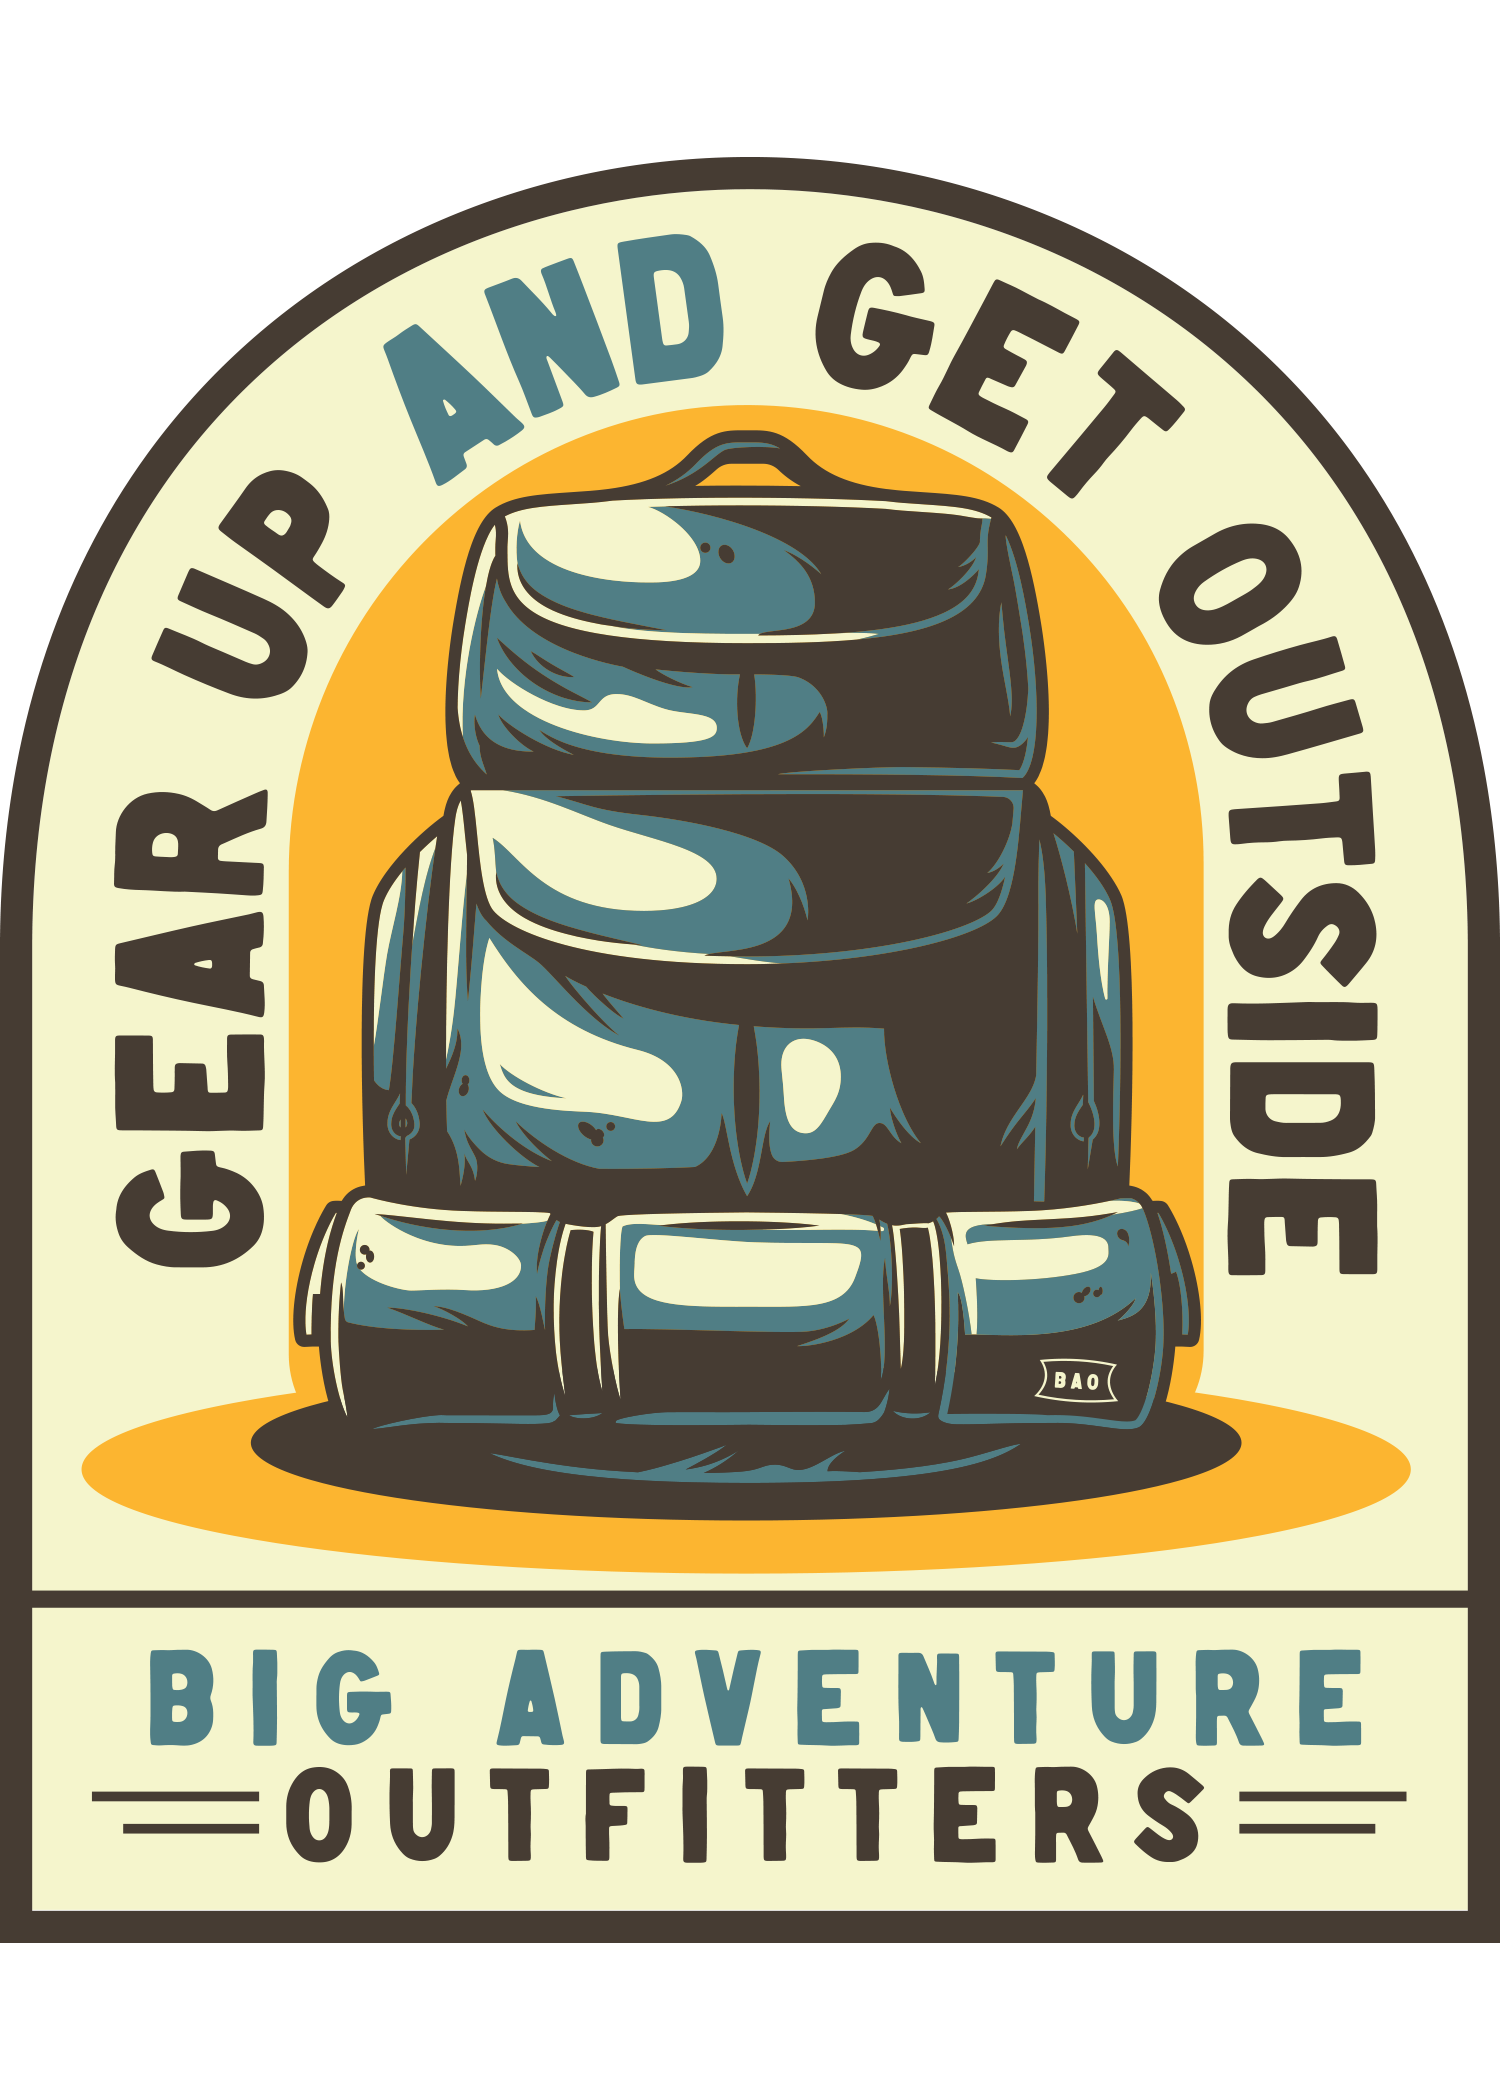 Gear Up & Get Outside Sticker Big Adventure Outfitters